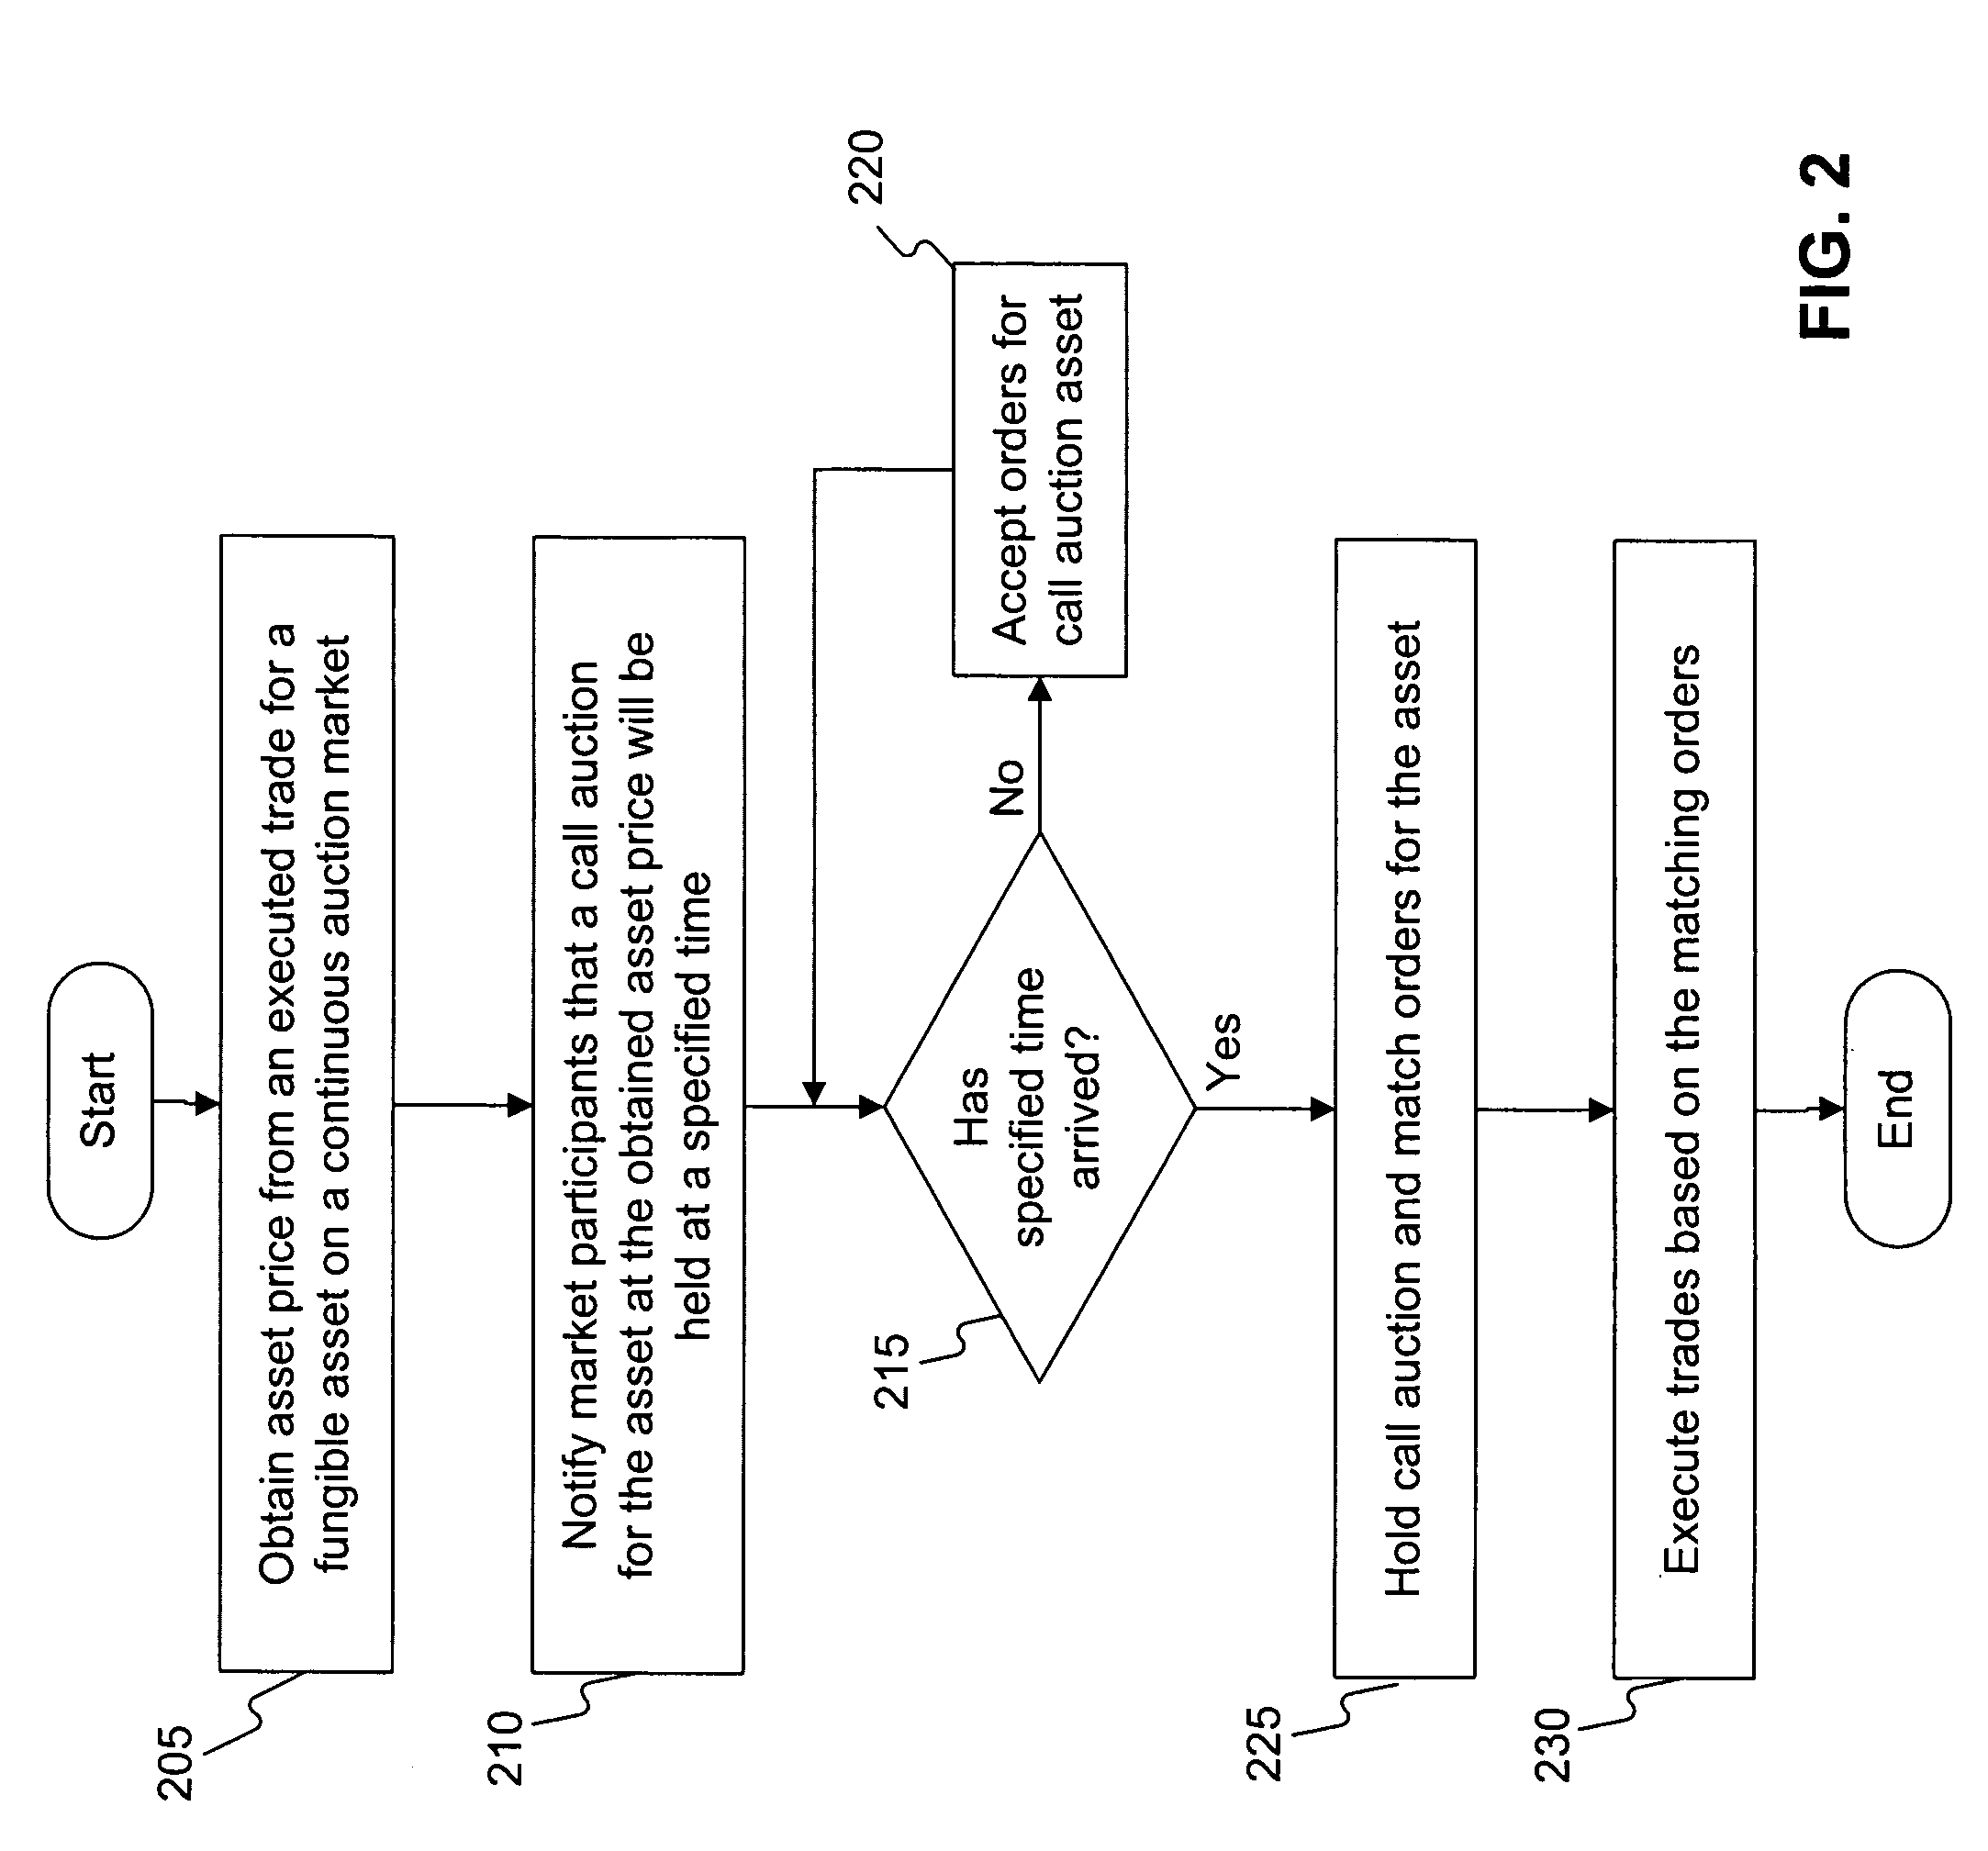 System and method for a continuous auction market with dynamically triggered temporal follow-on auctions